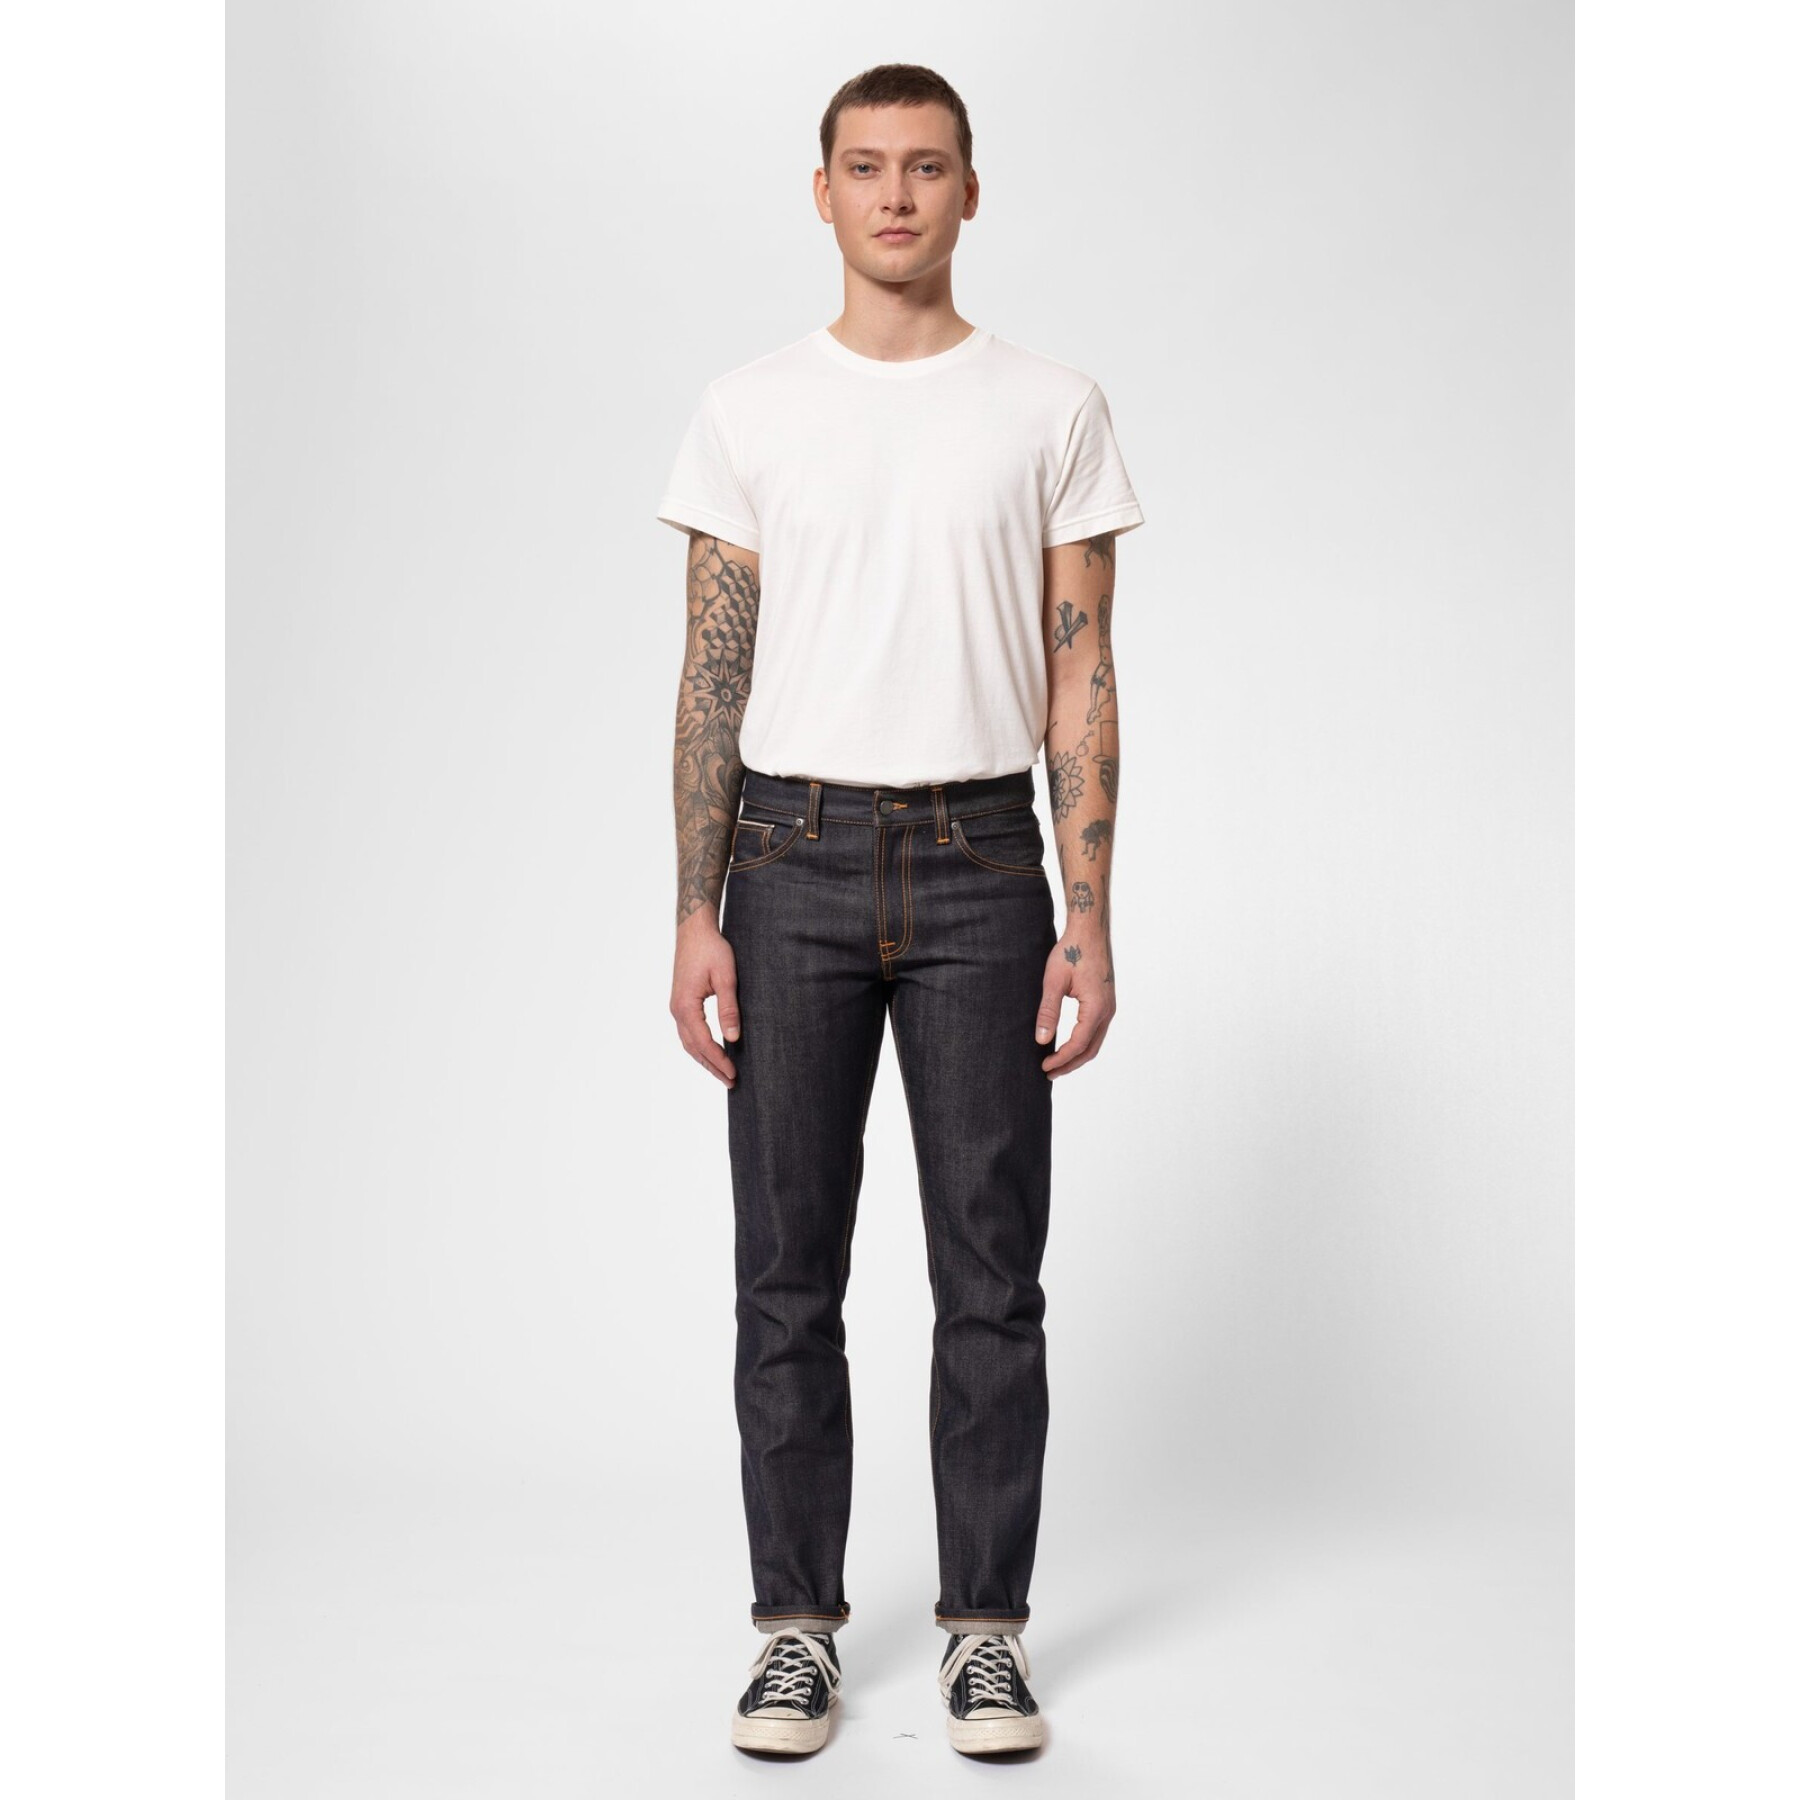 Vaqueros Nudie Jeans Gritty Jackson